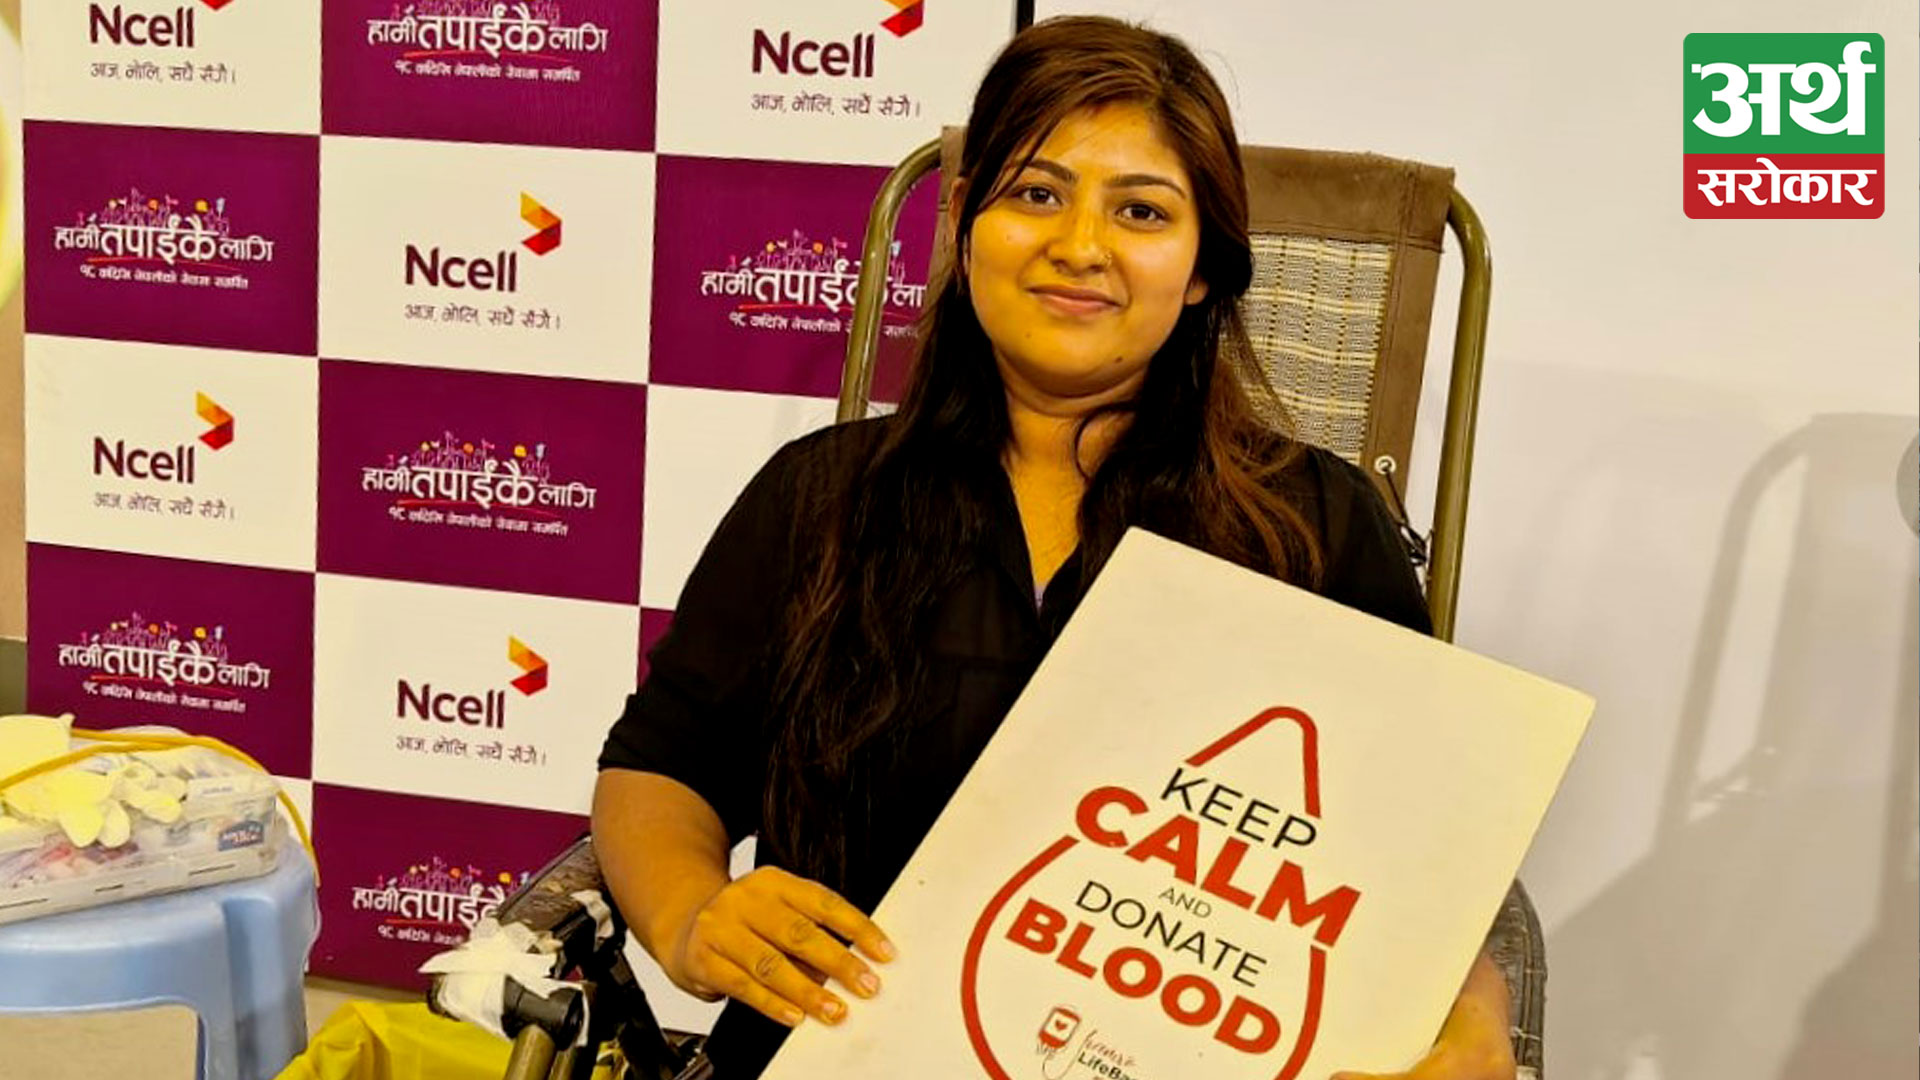 On its 18th anniversary, Ncell organizes a blood donation program.